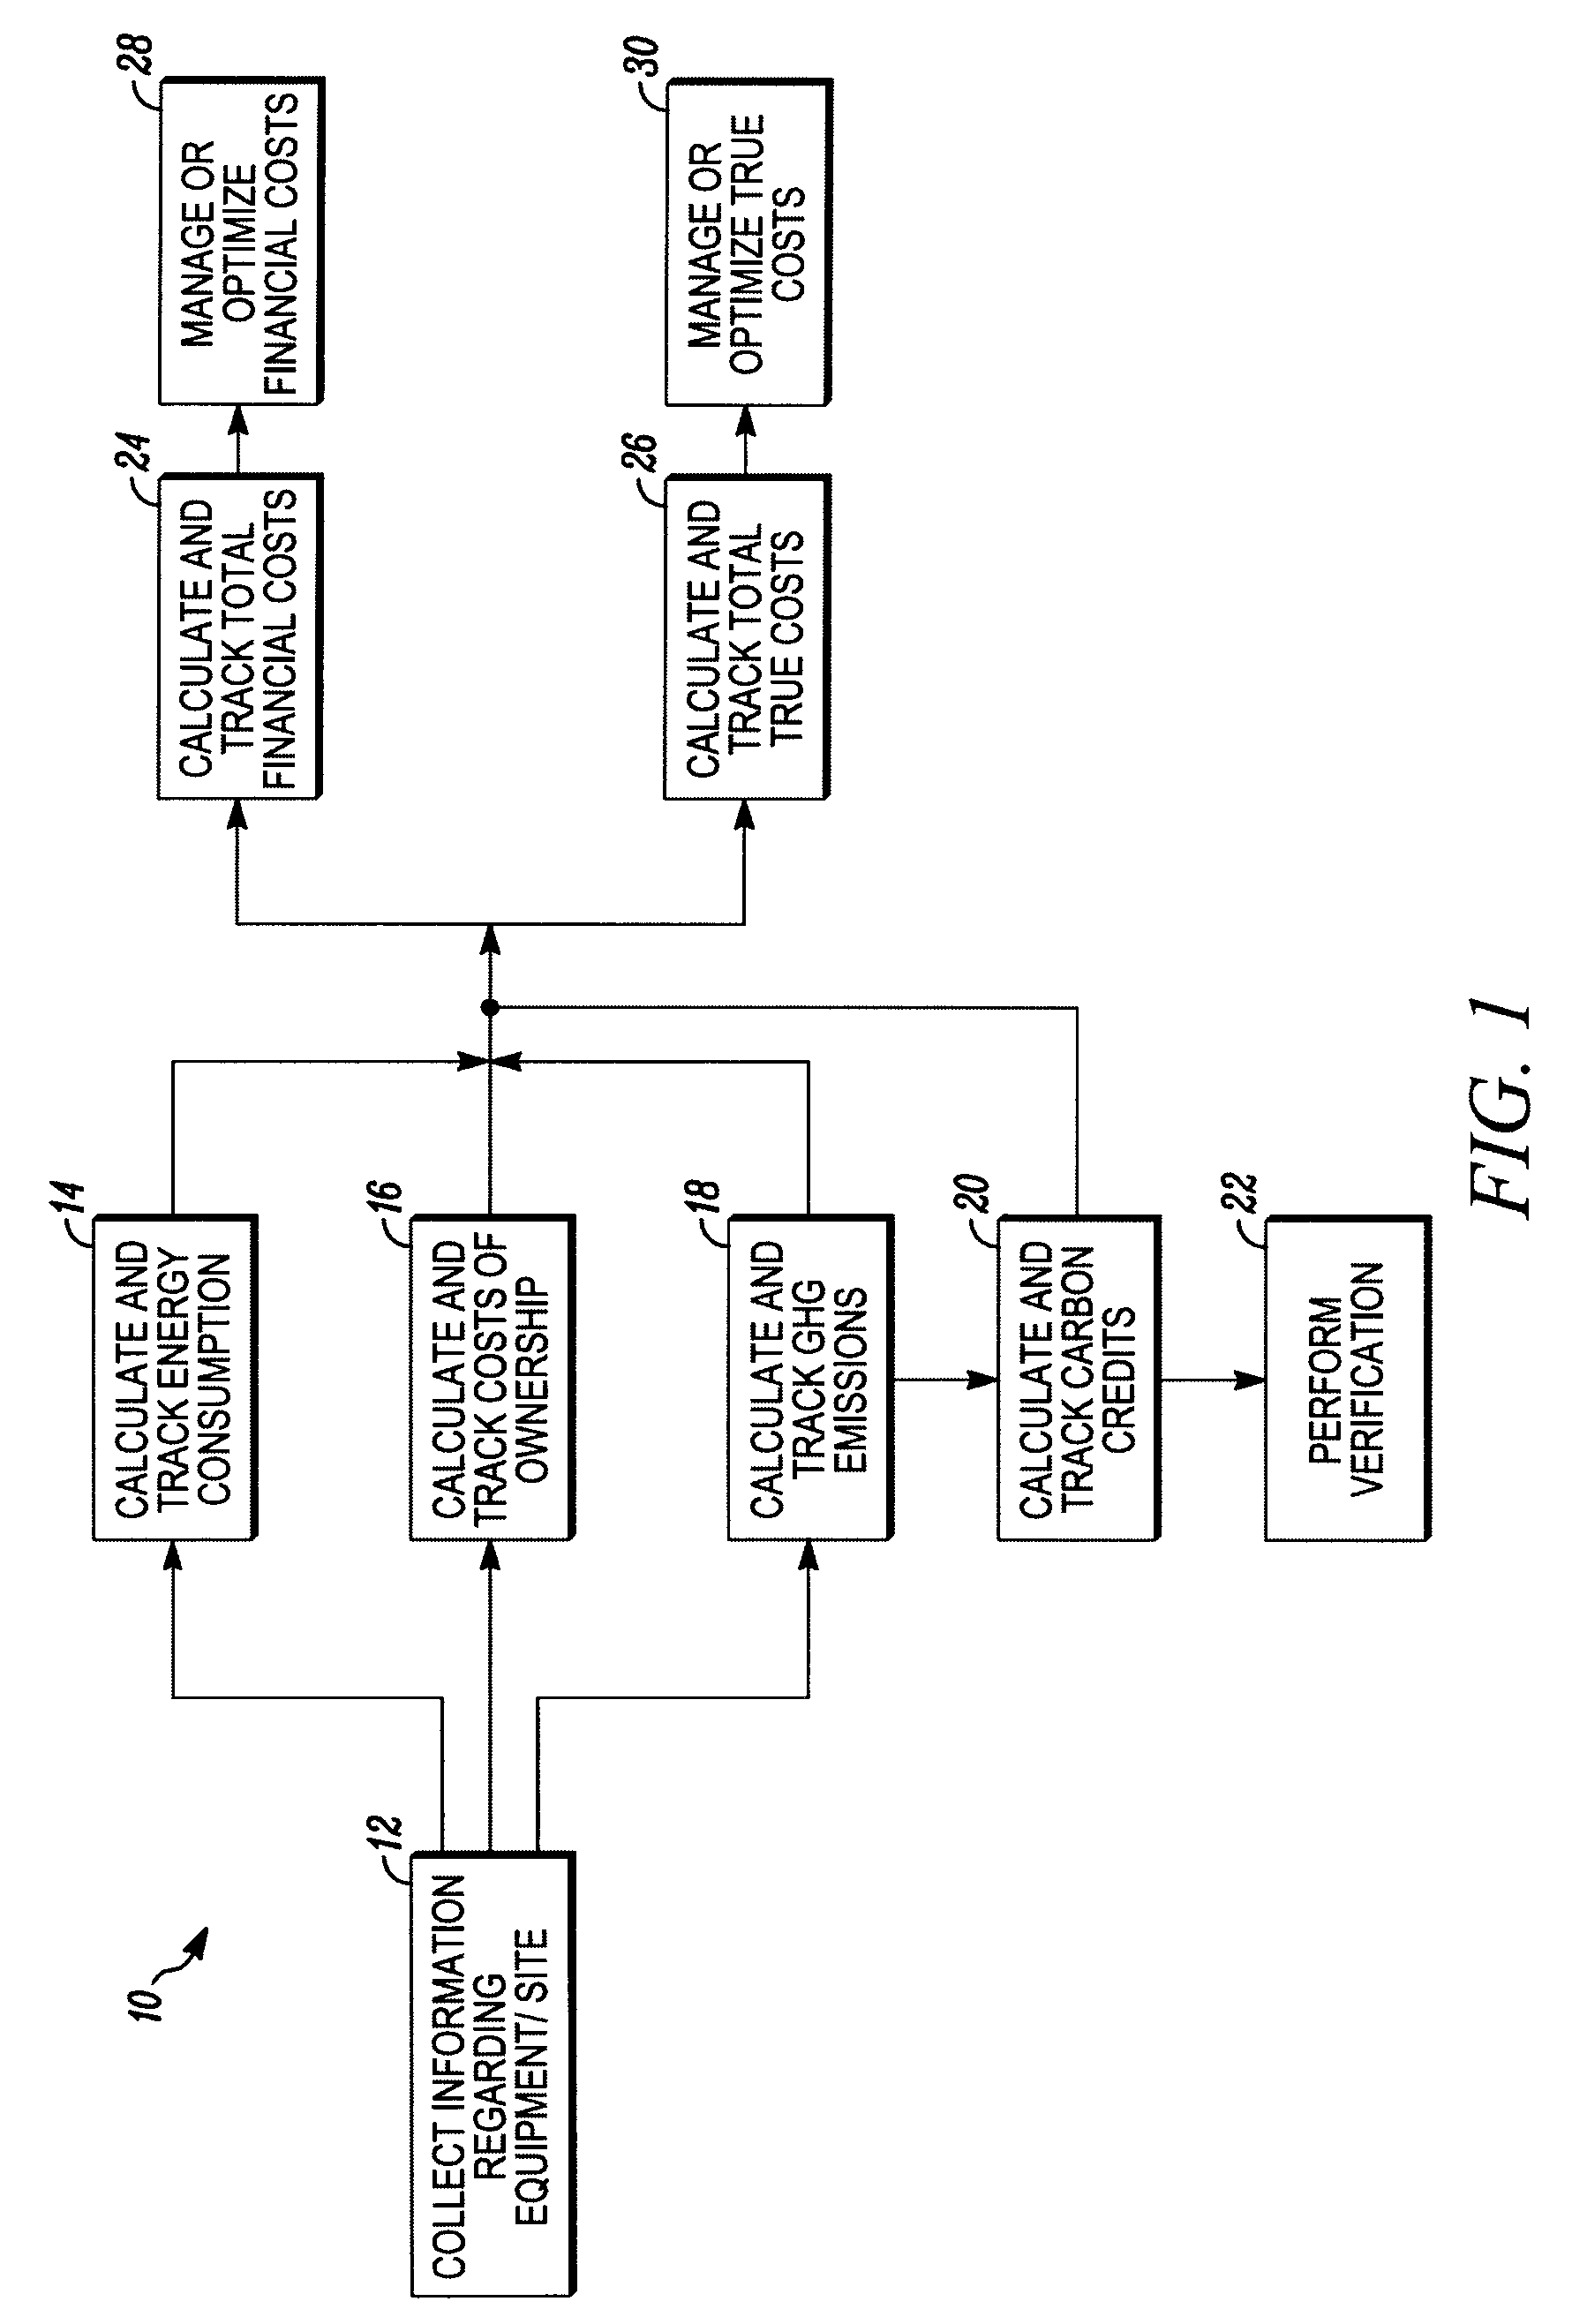 Method and system for tracking and managing various operating parameters of enterprise assets